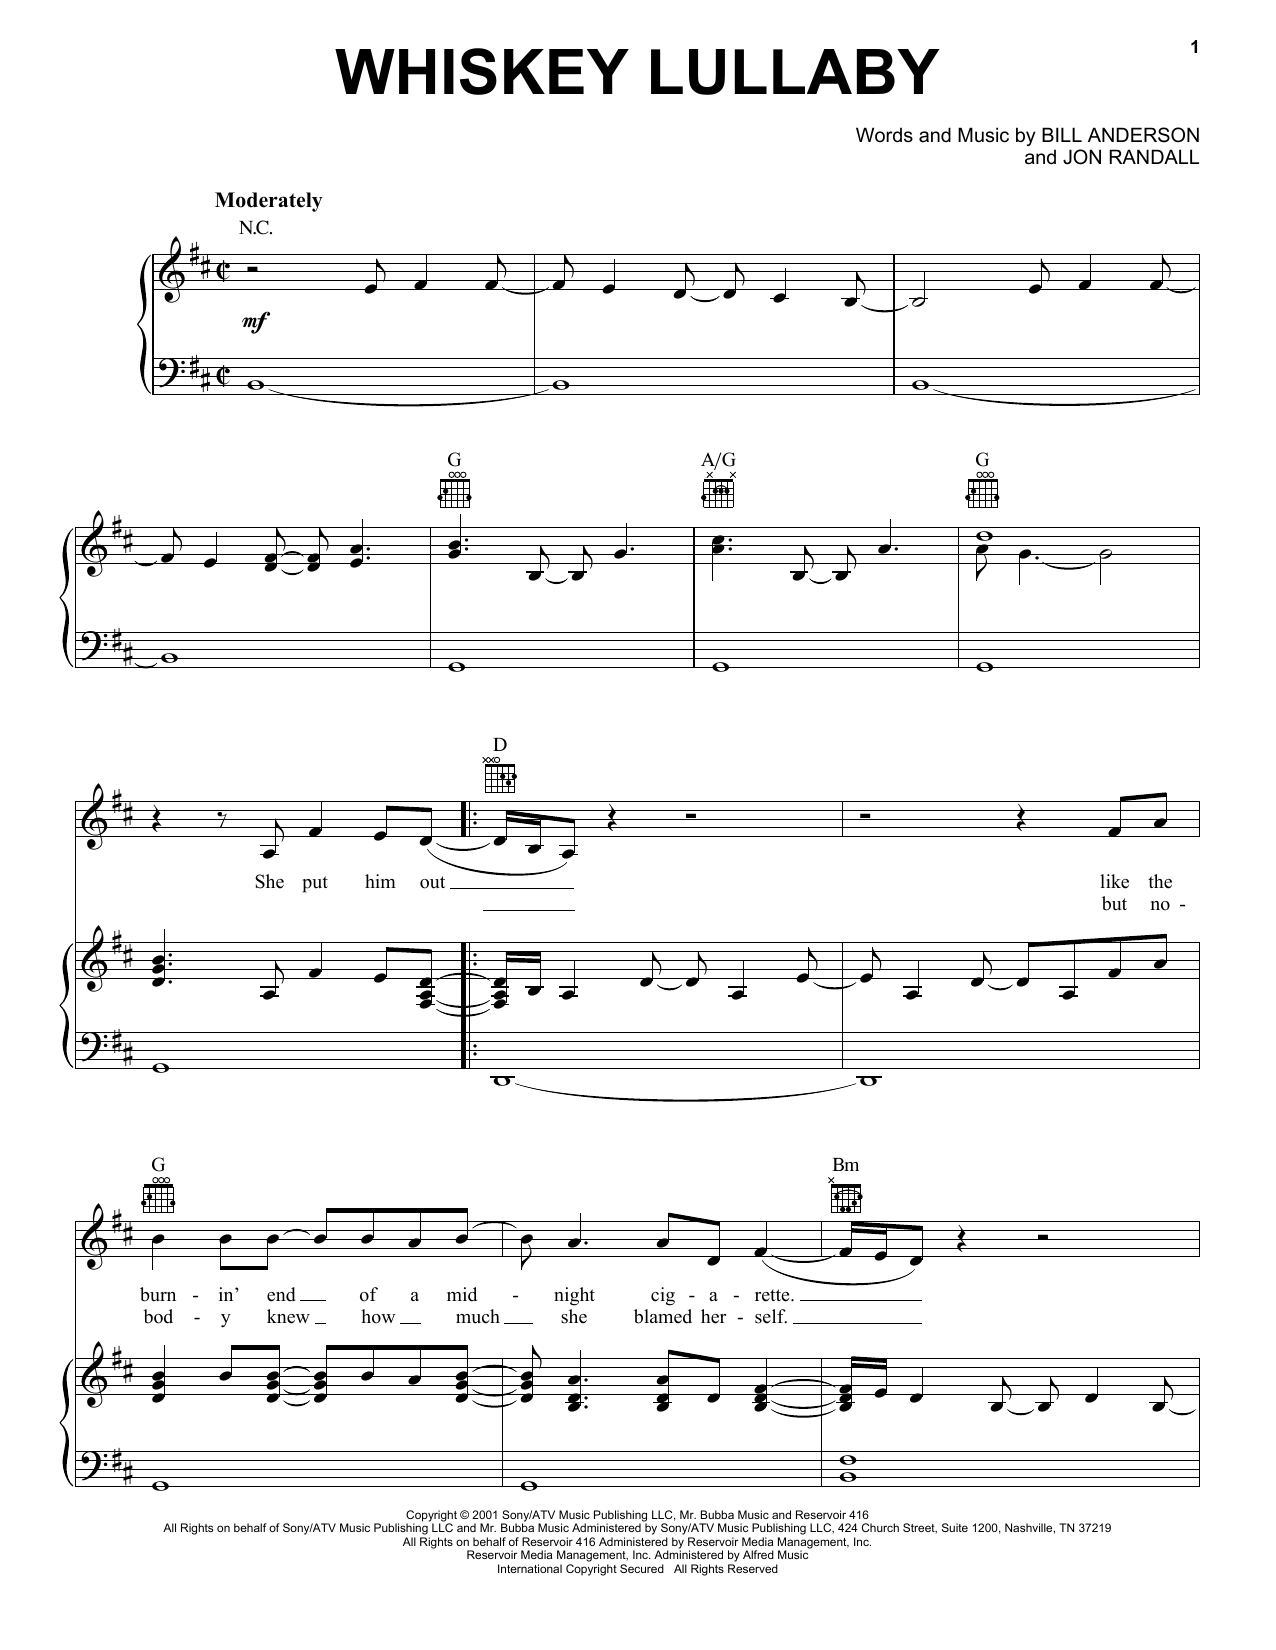 Brad Paisley Whiskey Lullaby sheet music notes and chords. Download Printable PDF.